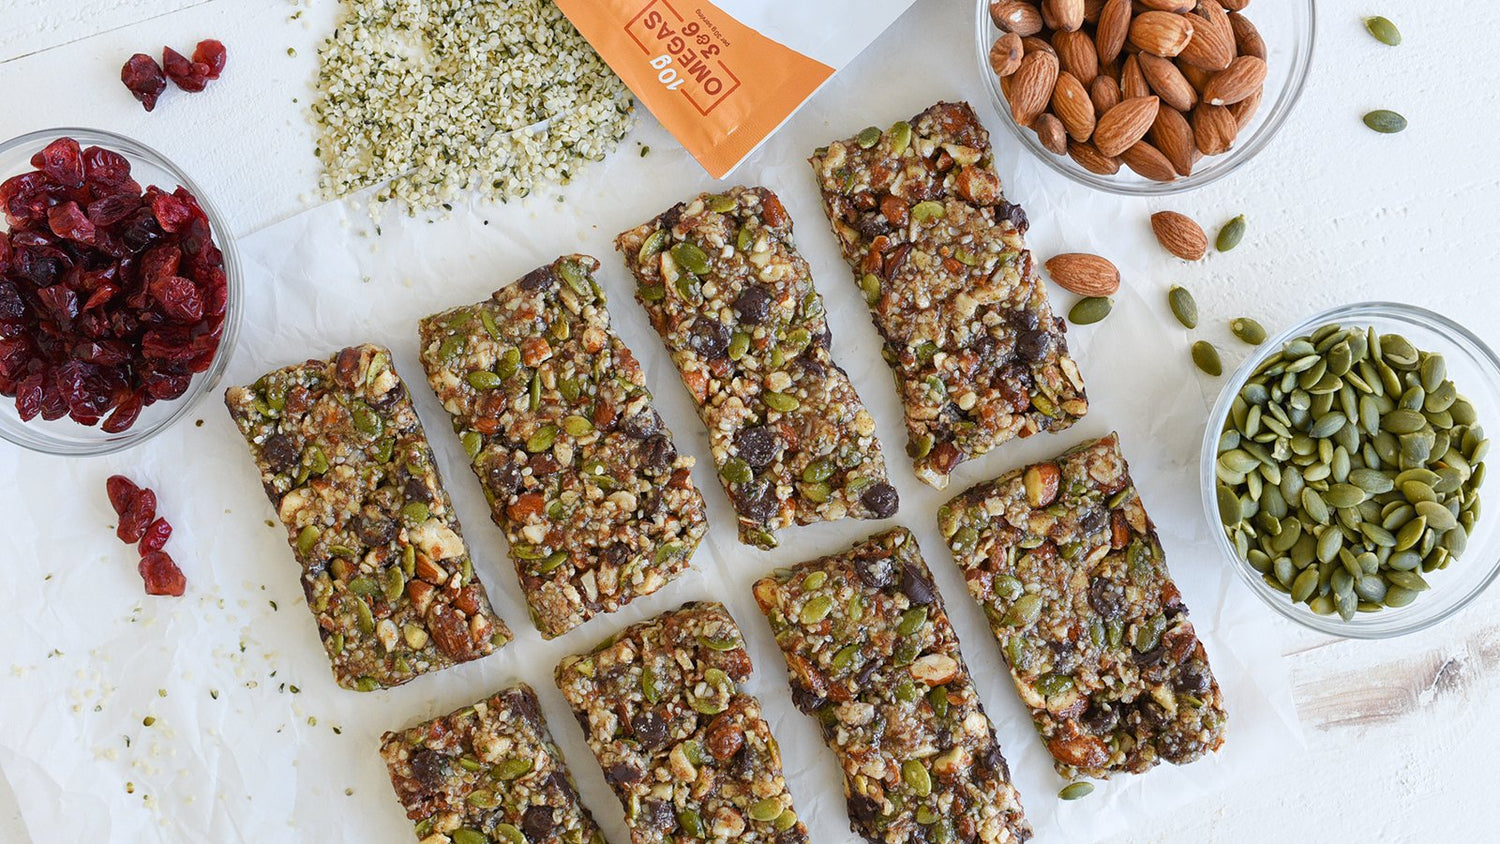 Omega 3 Rich Hemp Heart Recipe From Manitoba Harvest Pumpkin Spice Trail Bars With Dried Cranberries Almonds Pumpkin Seeds